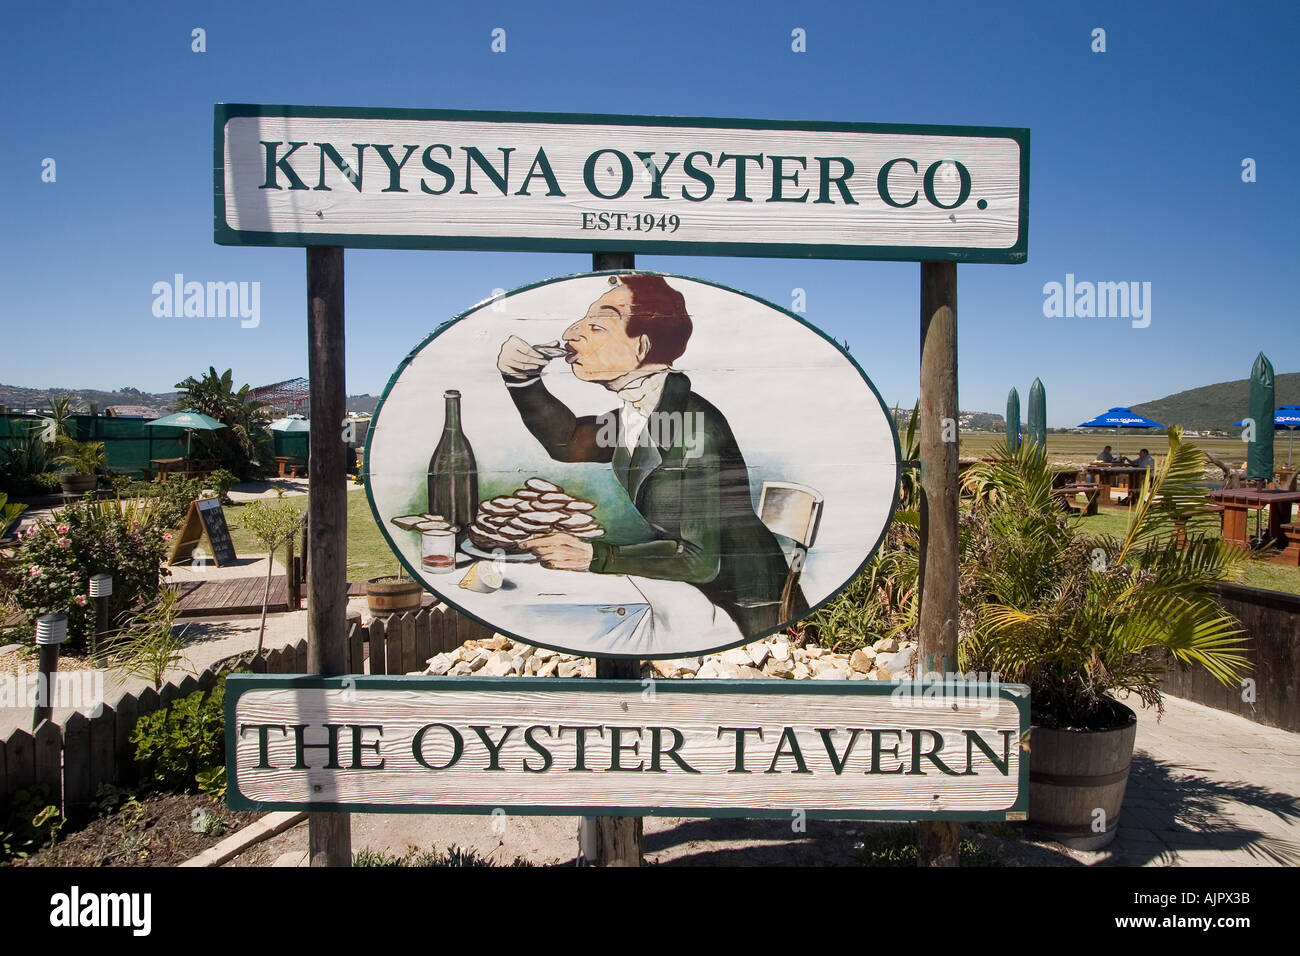 south africa garden route Knysna Oyster farm sign of The Oyster Tavern Stock Photo